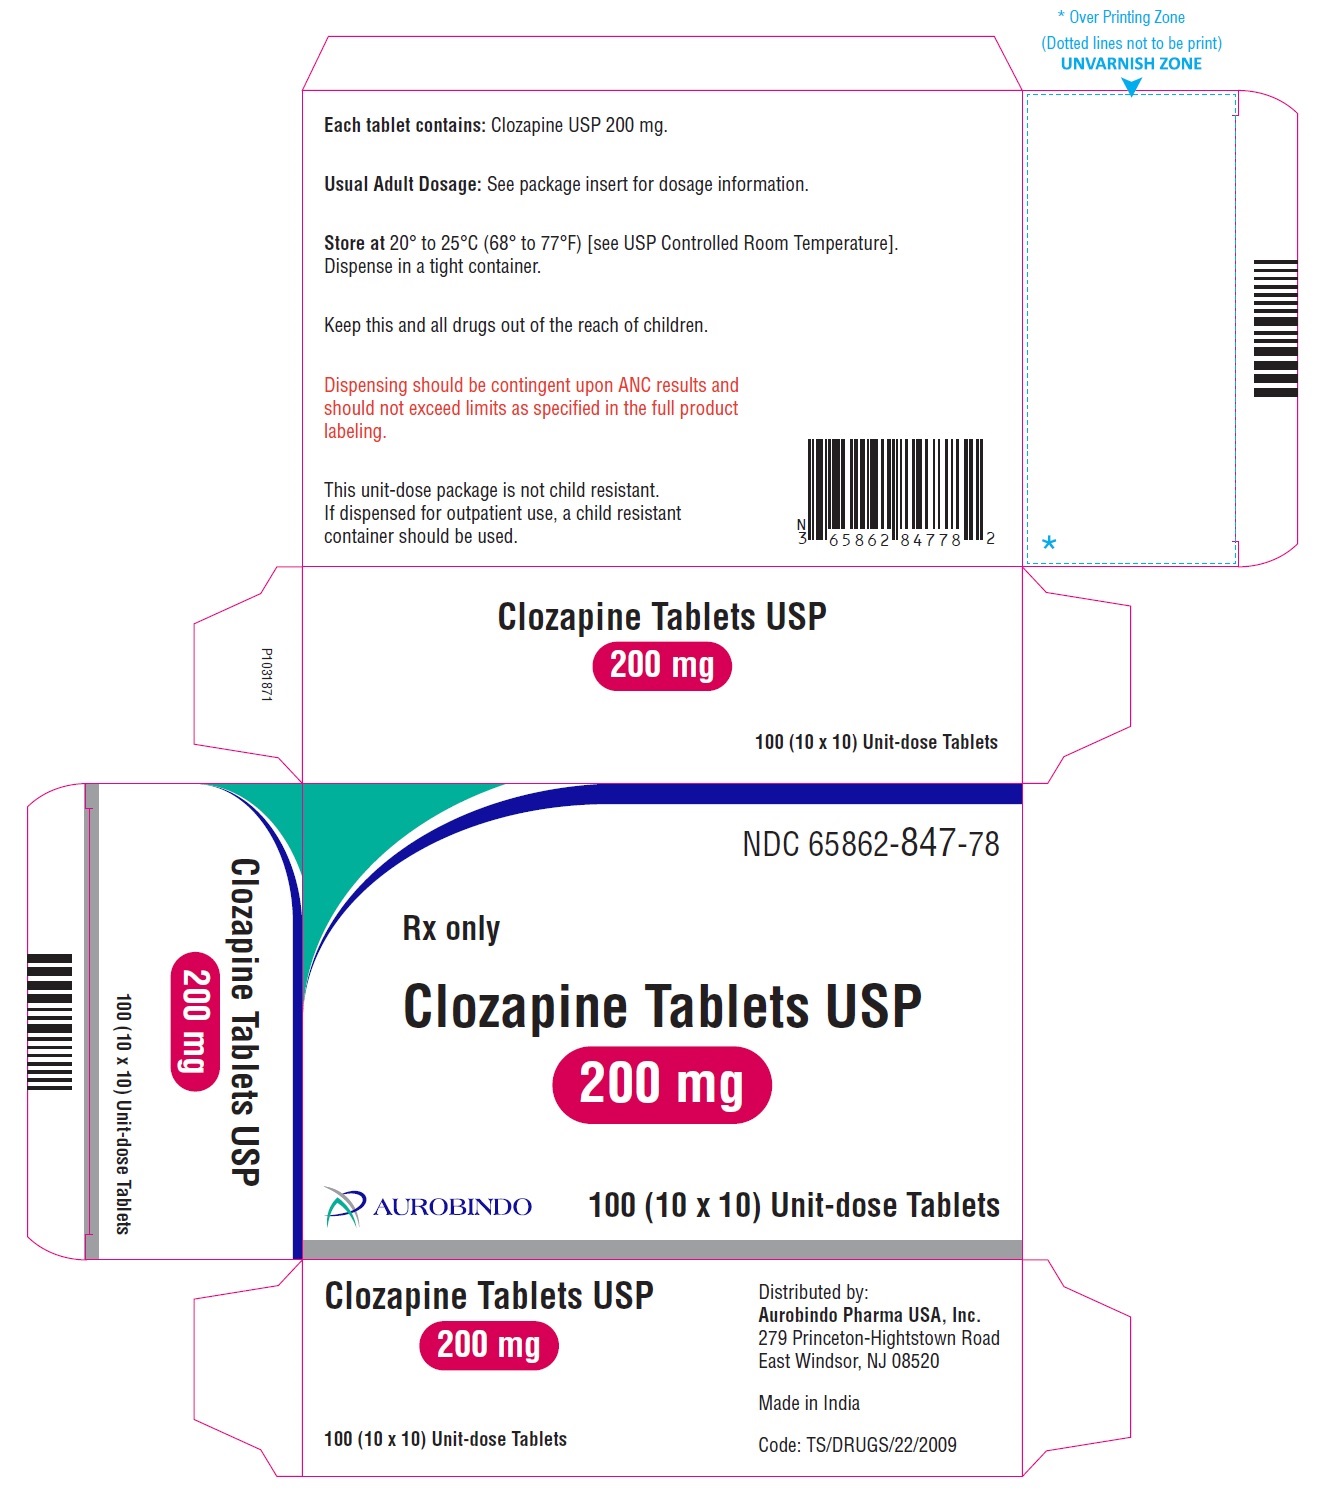 PACKAGE LABEL-PRINCIPAL DISPLAY PANEL - 200 mg Blister Carton 100 (10 x 10) Unit-dose Tablets